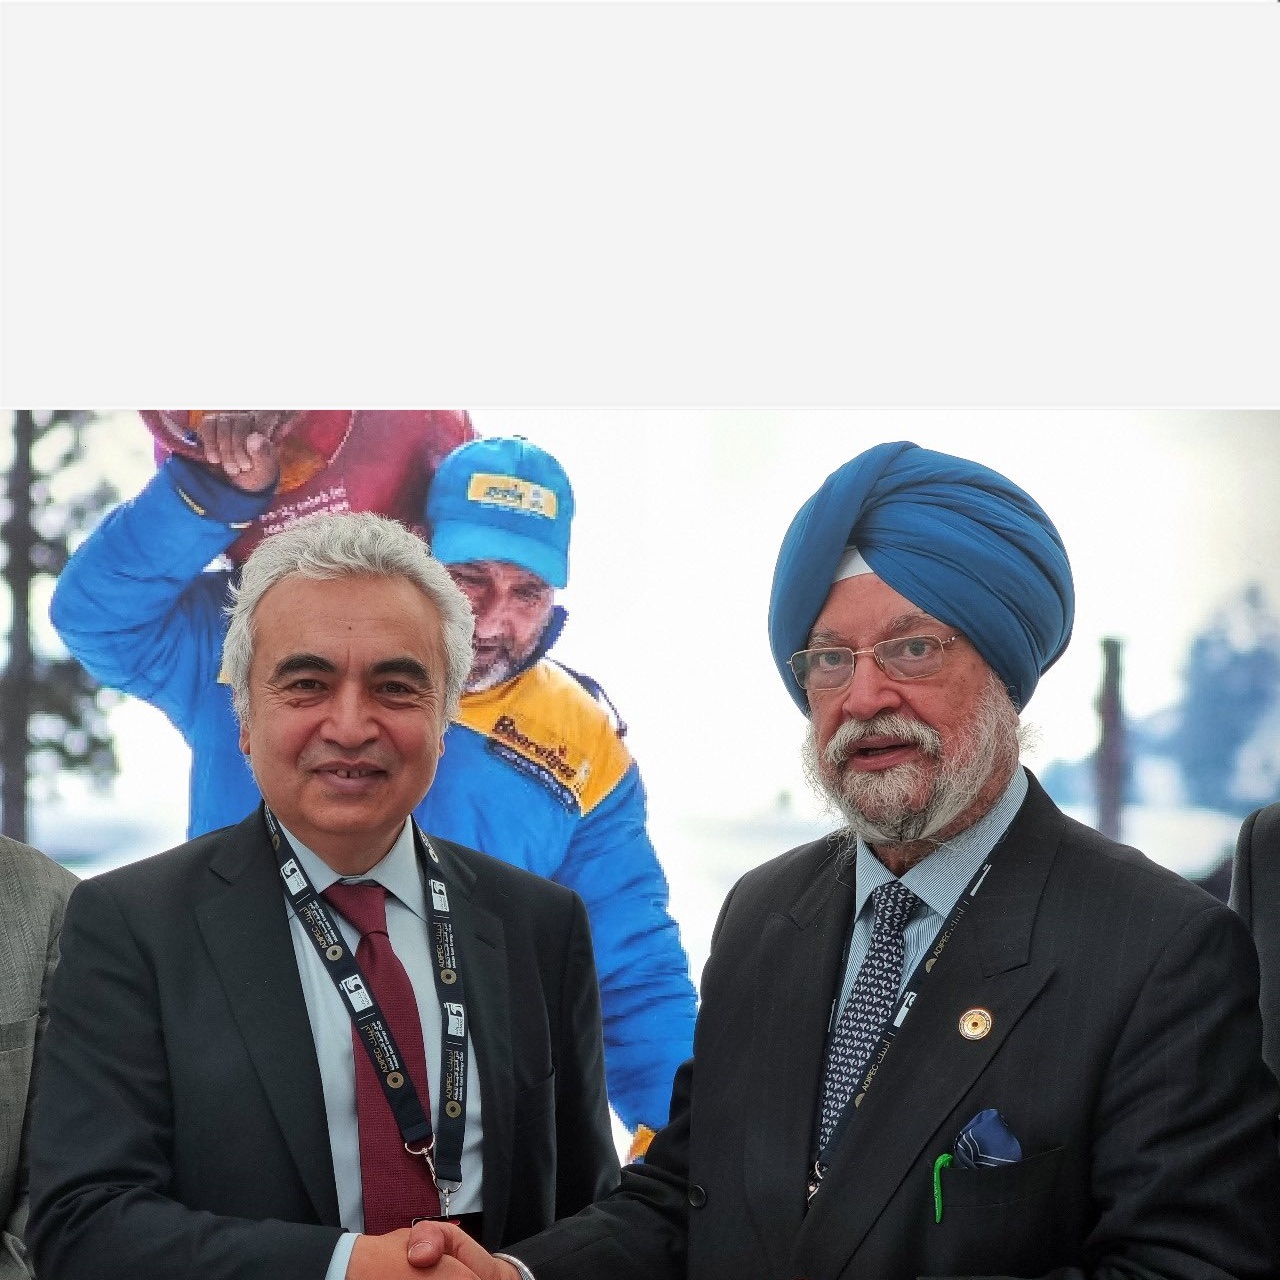 Min. Shri Hardeep S Puri meet  Mr Fatih Birol, Executive Director of  IEA  in Abu Dhabi. Discussed current energy market pressures, imperative for an orderly energy transition that empowers all, & further strengthening of India-IEA cooperation. 